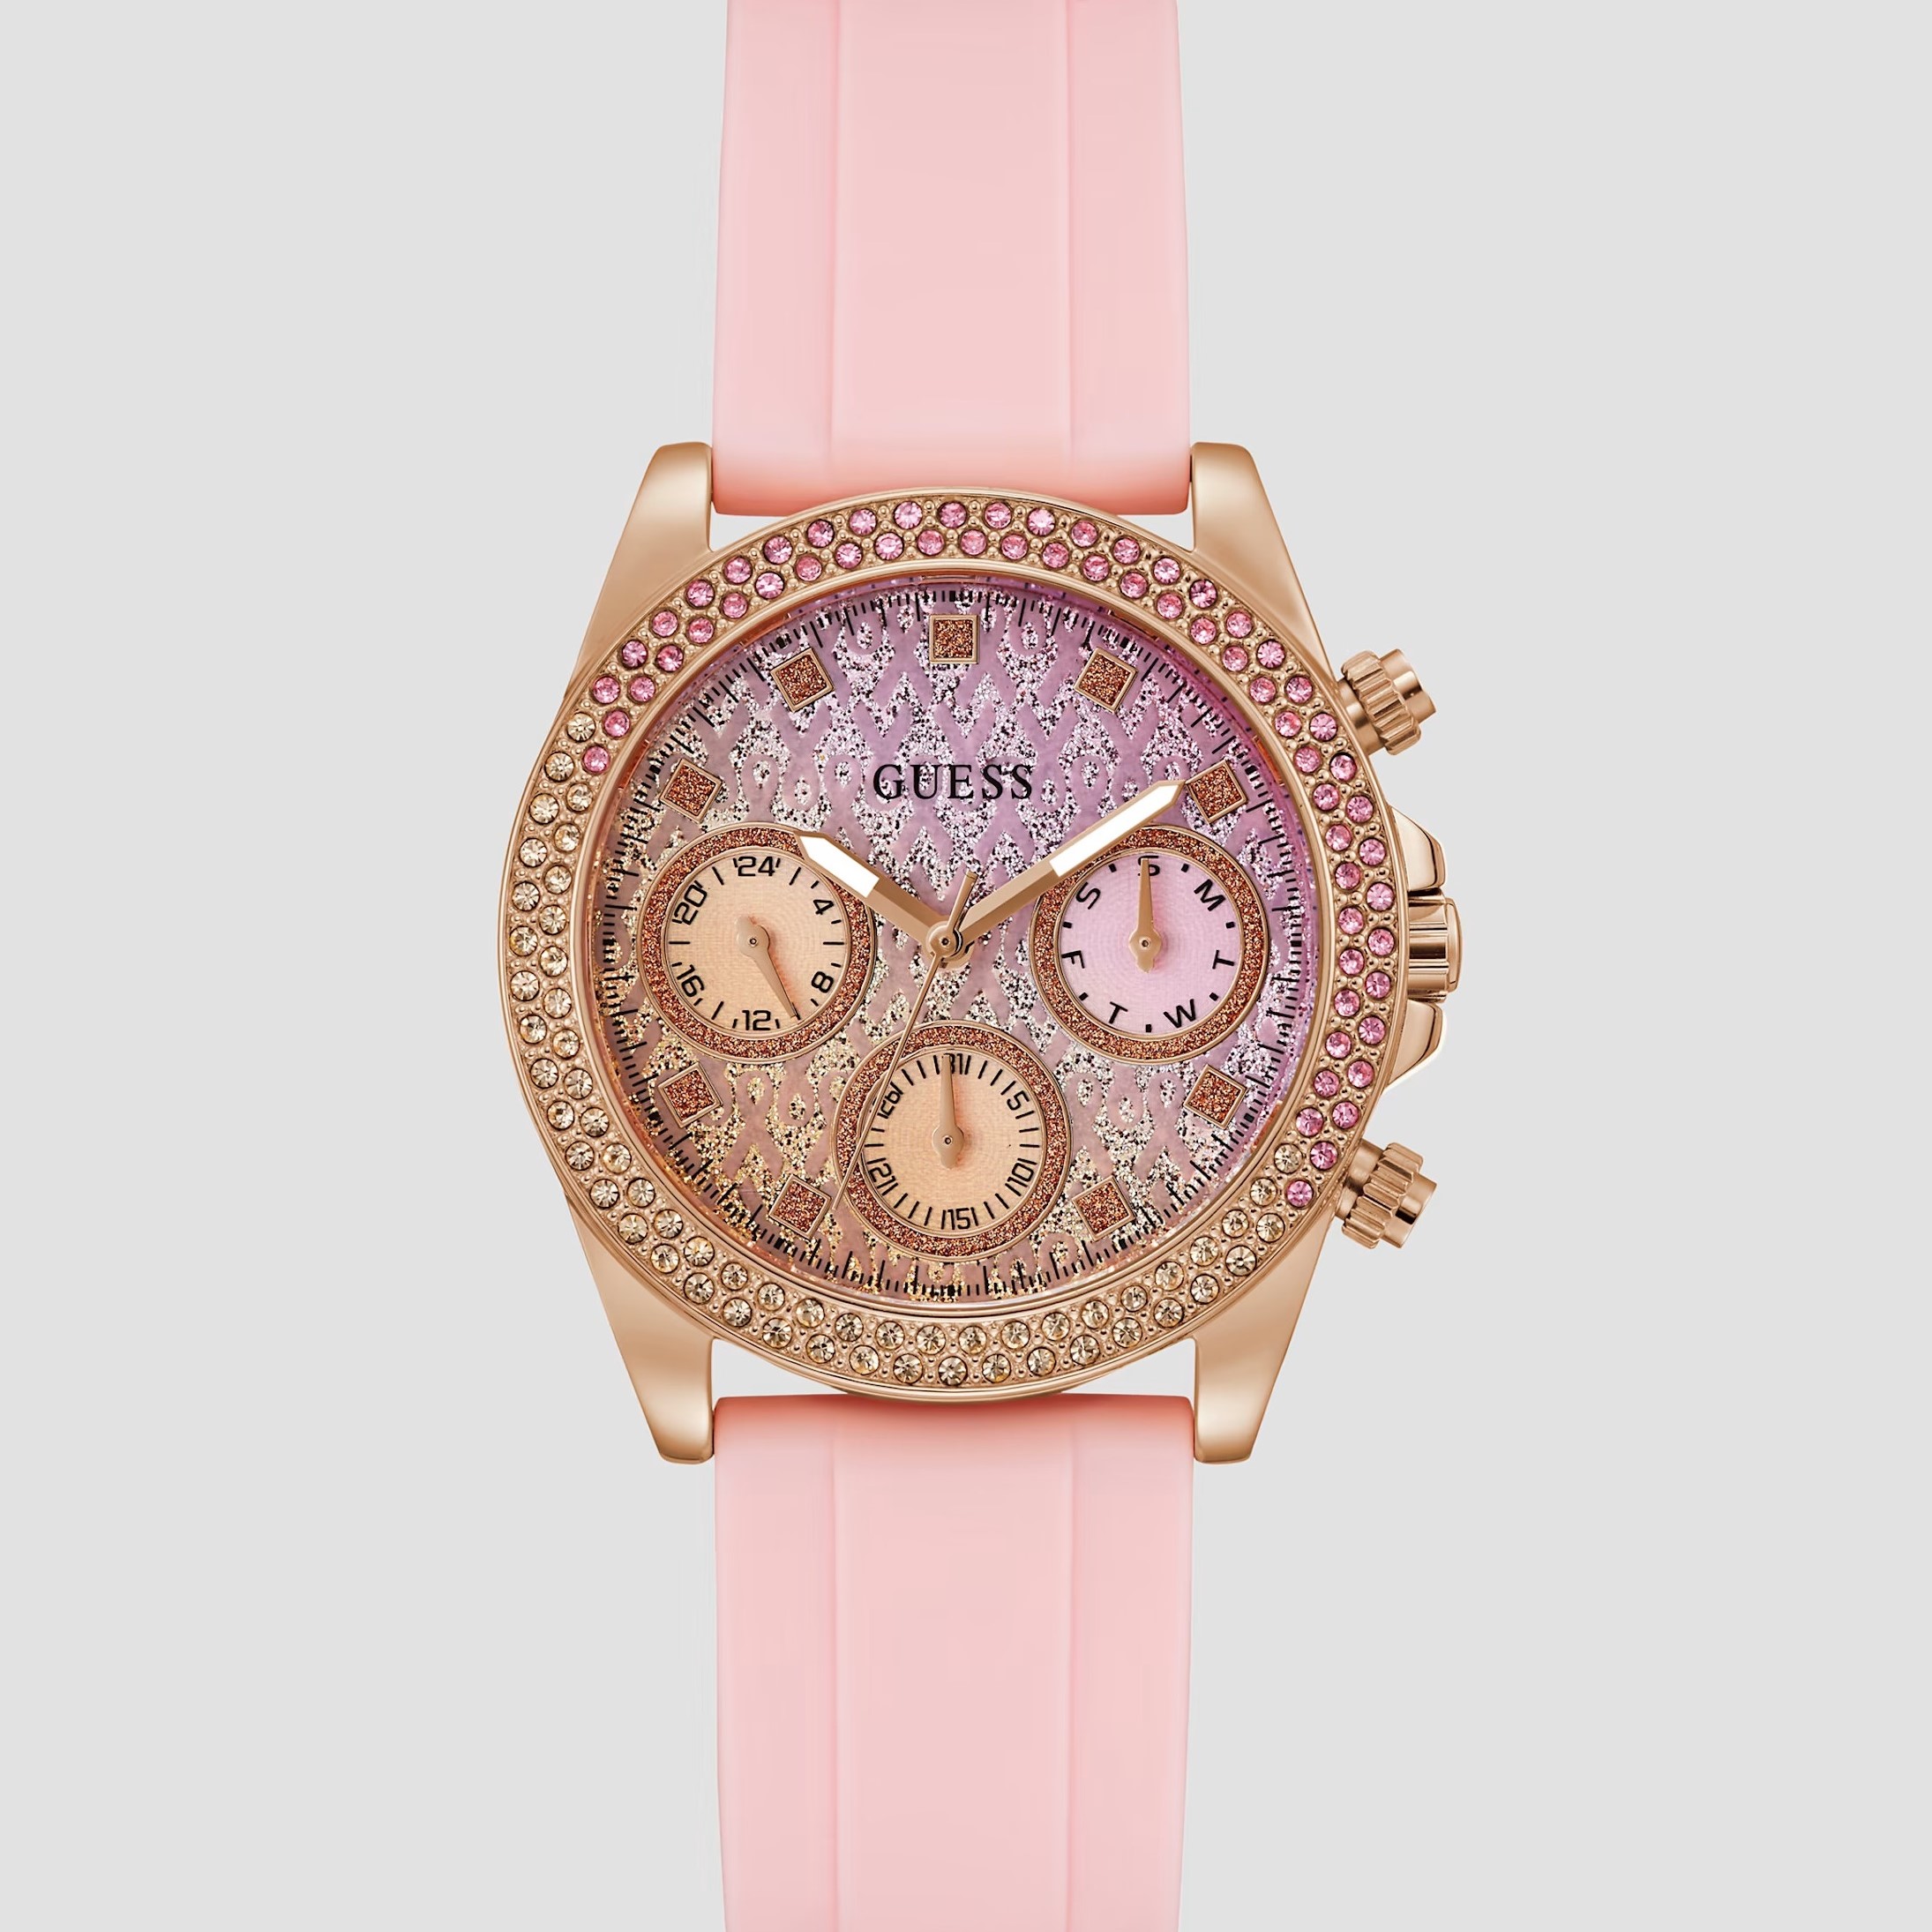 ĐỒNG HỒ ĐEO TAY NỮ GUESS LADIES SPARKLING PINK LIMITED EDITION WATCH GW0032L4 4